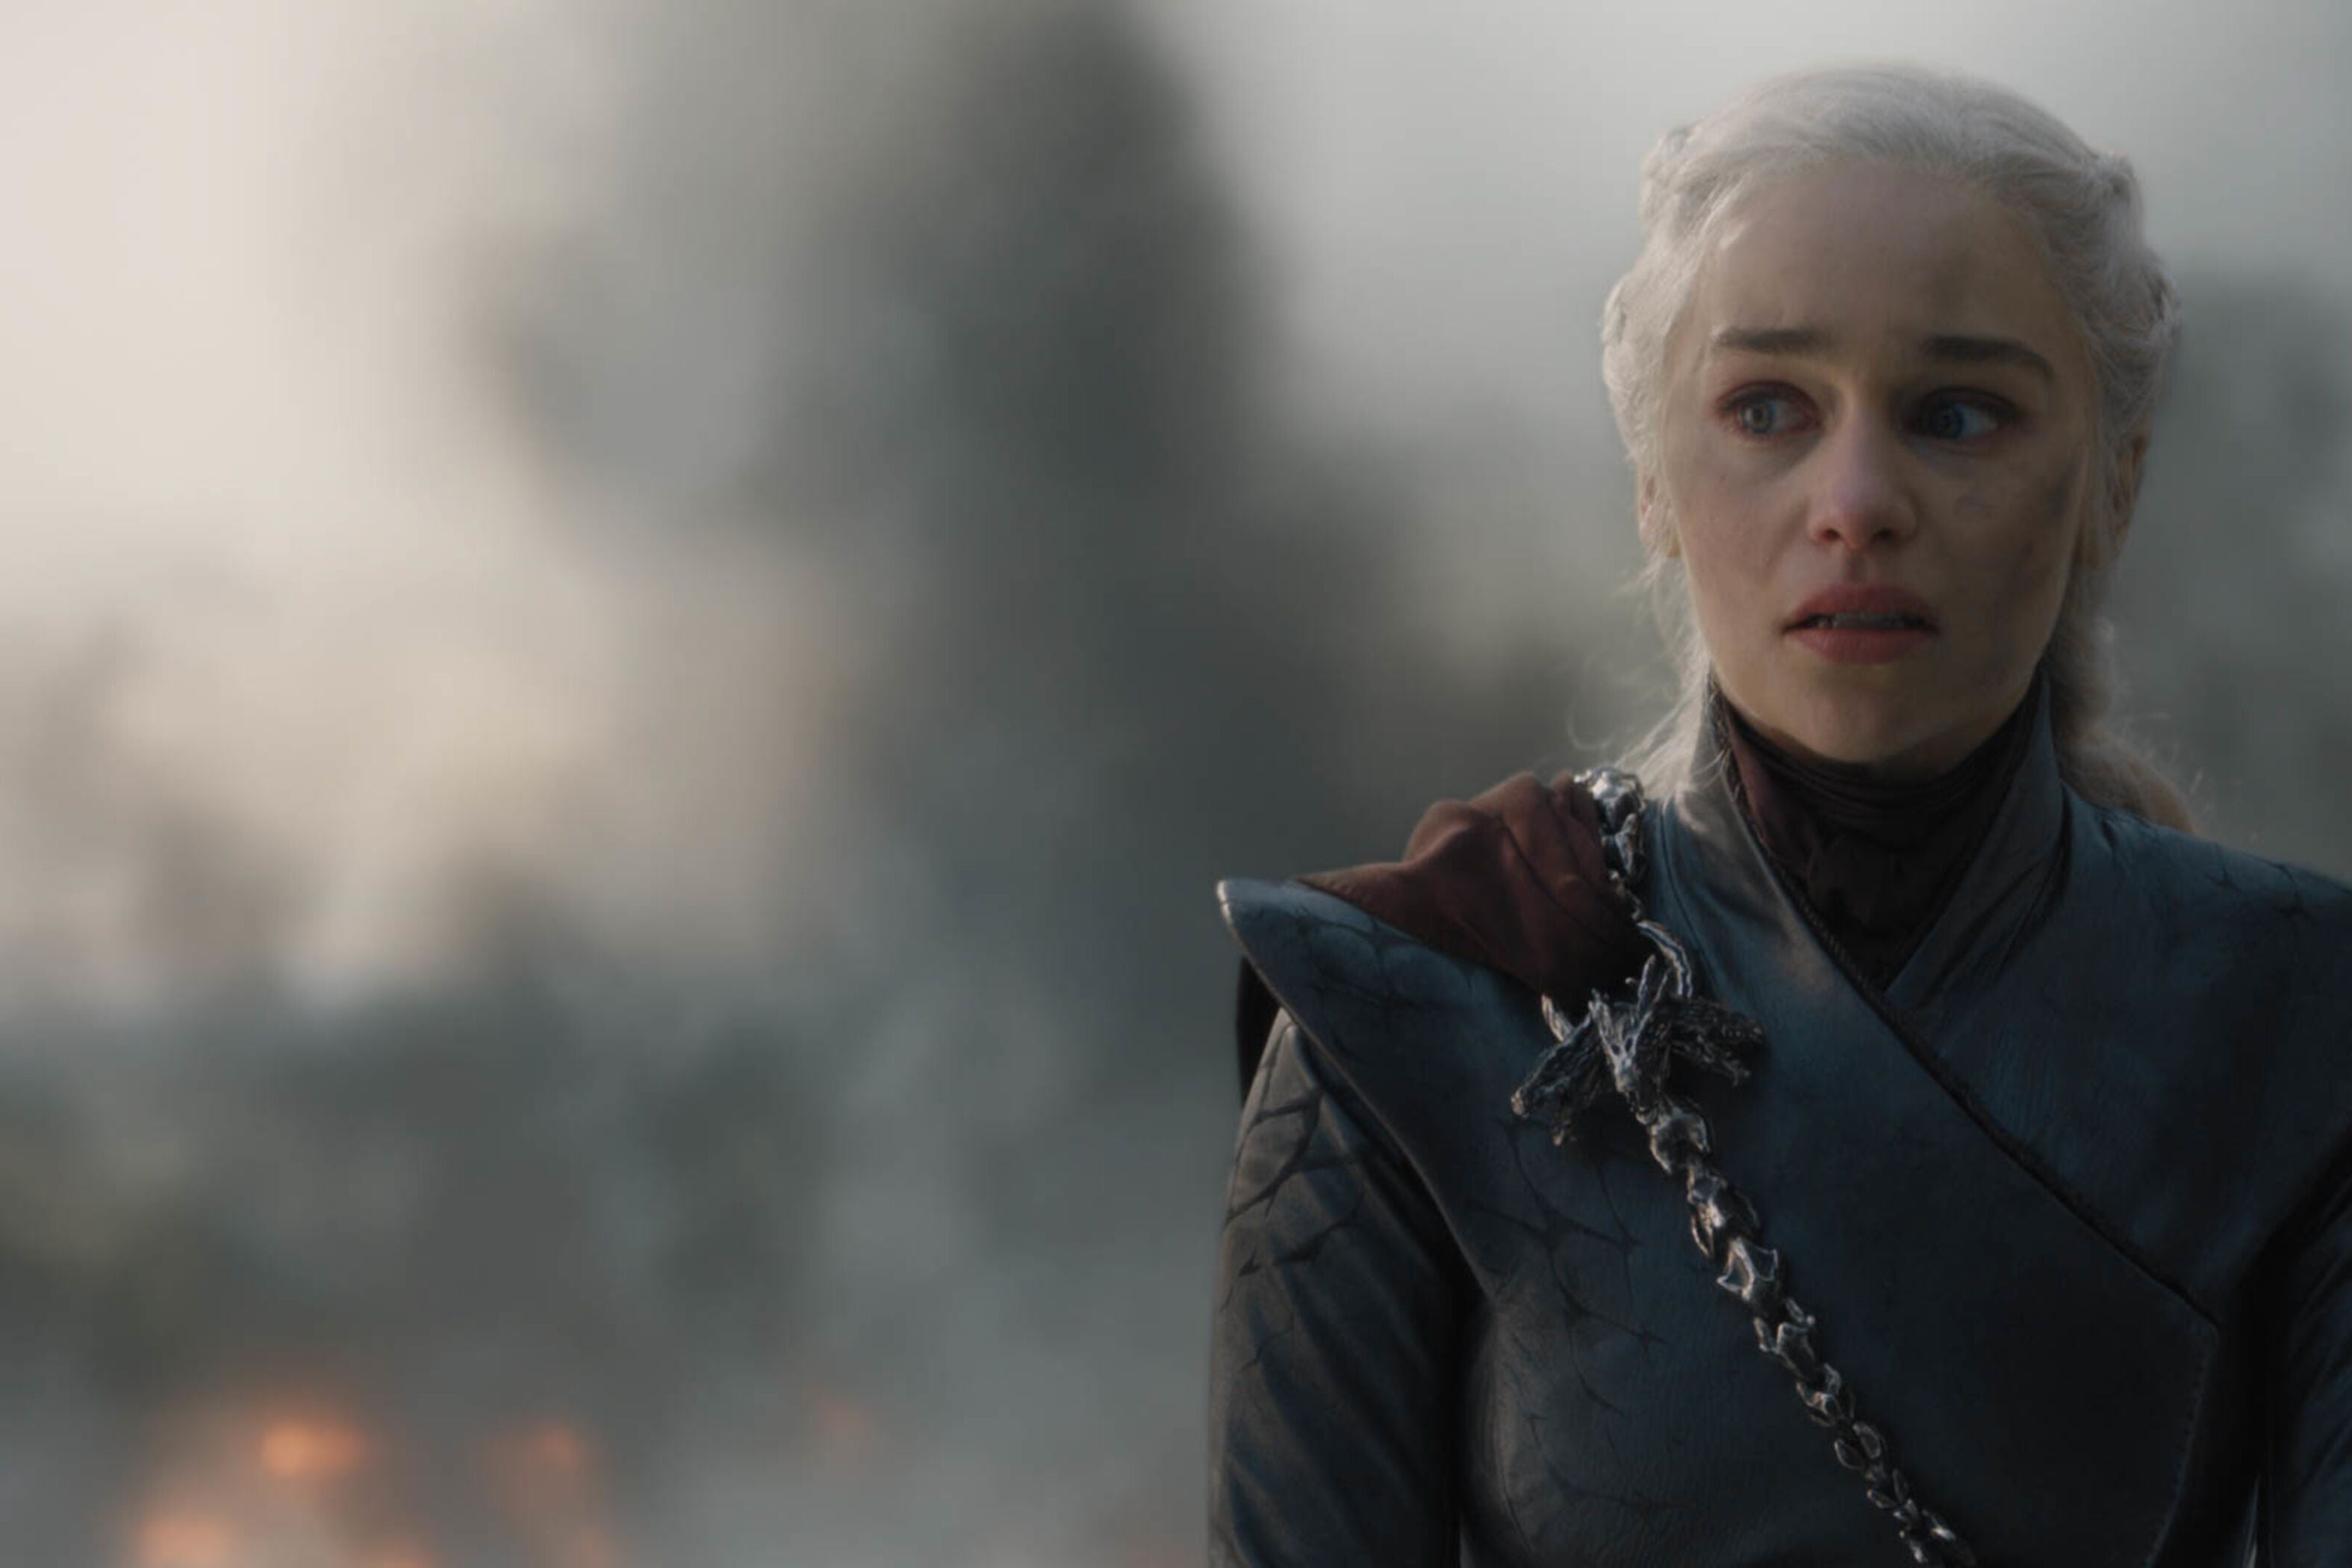 Daenerys Targaryen, her face smudged with soot and a wild look in her eyes.